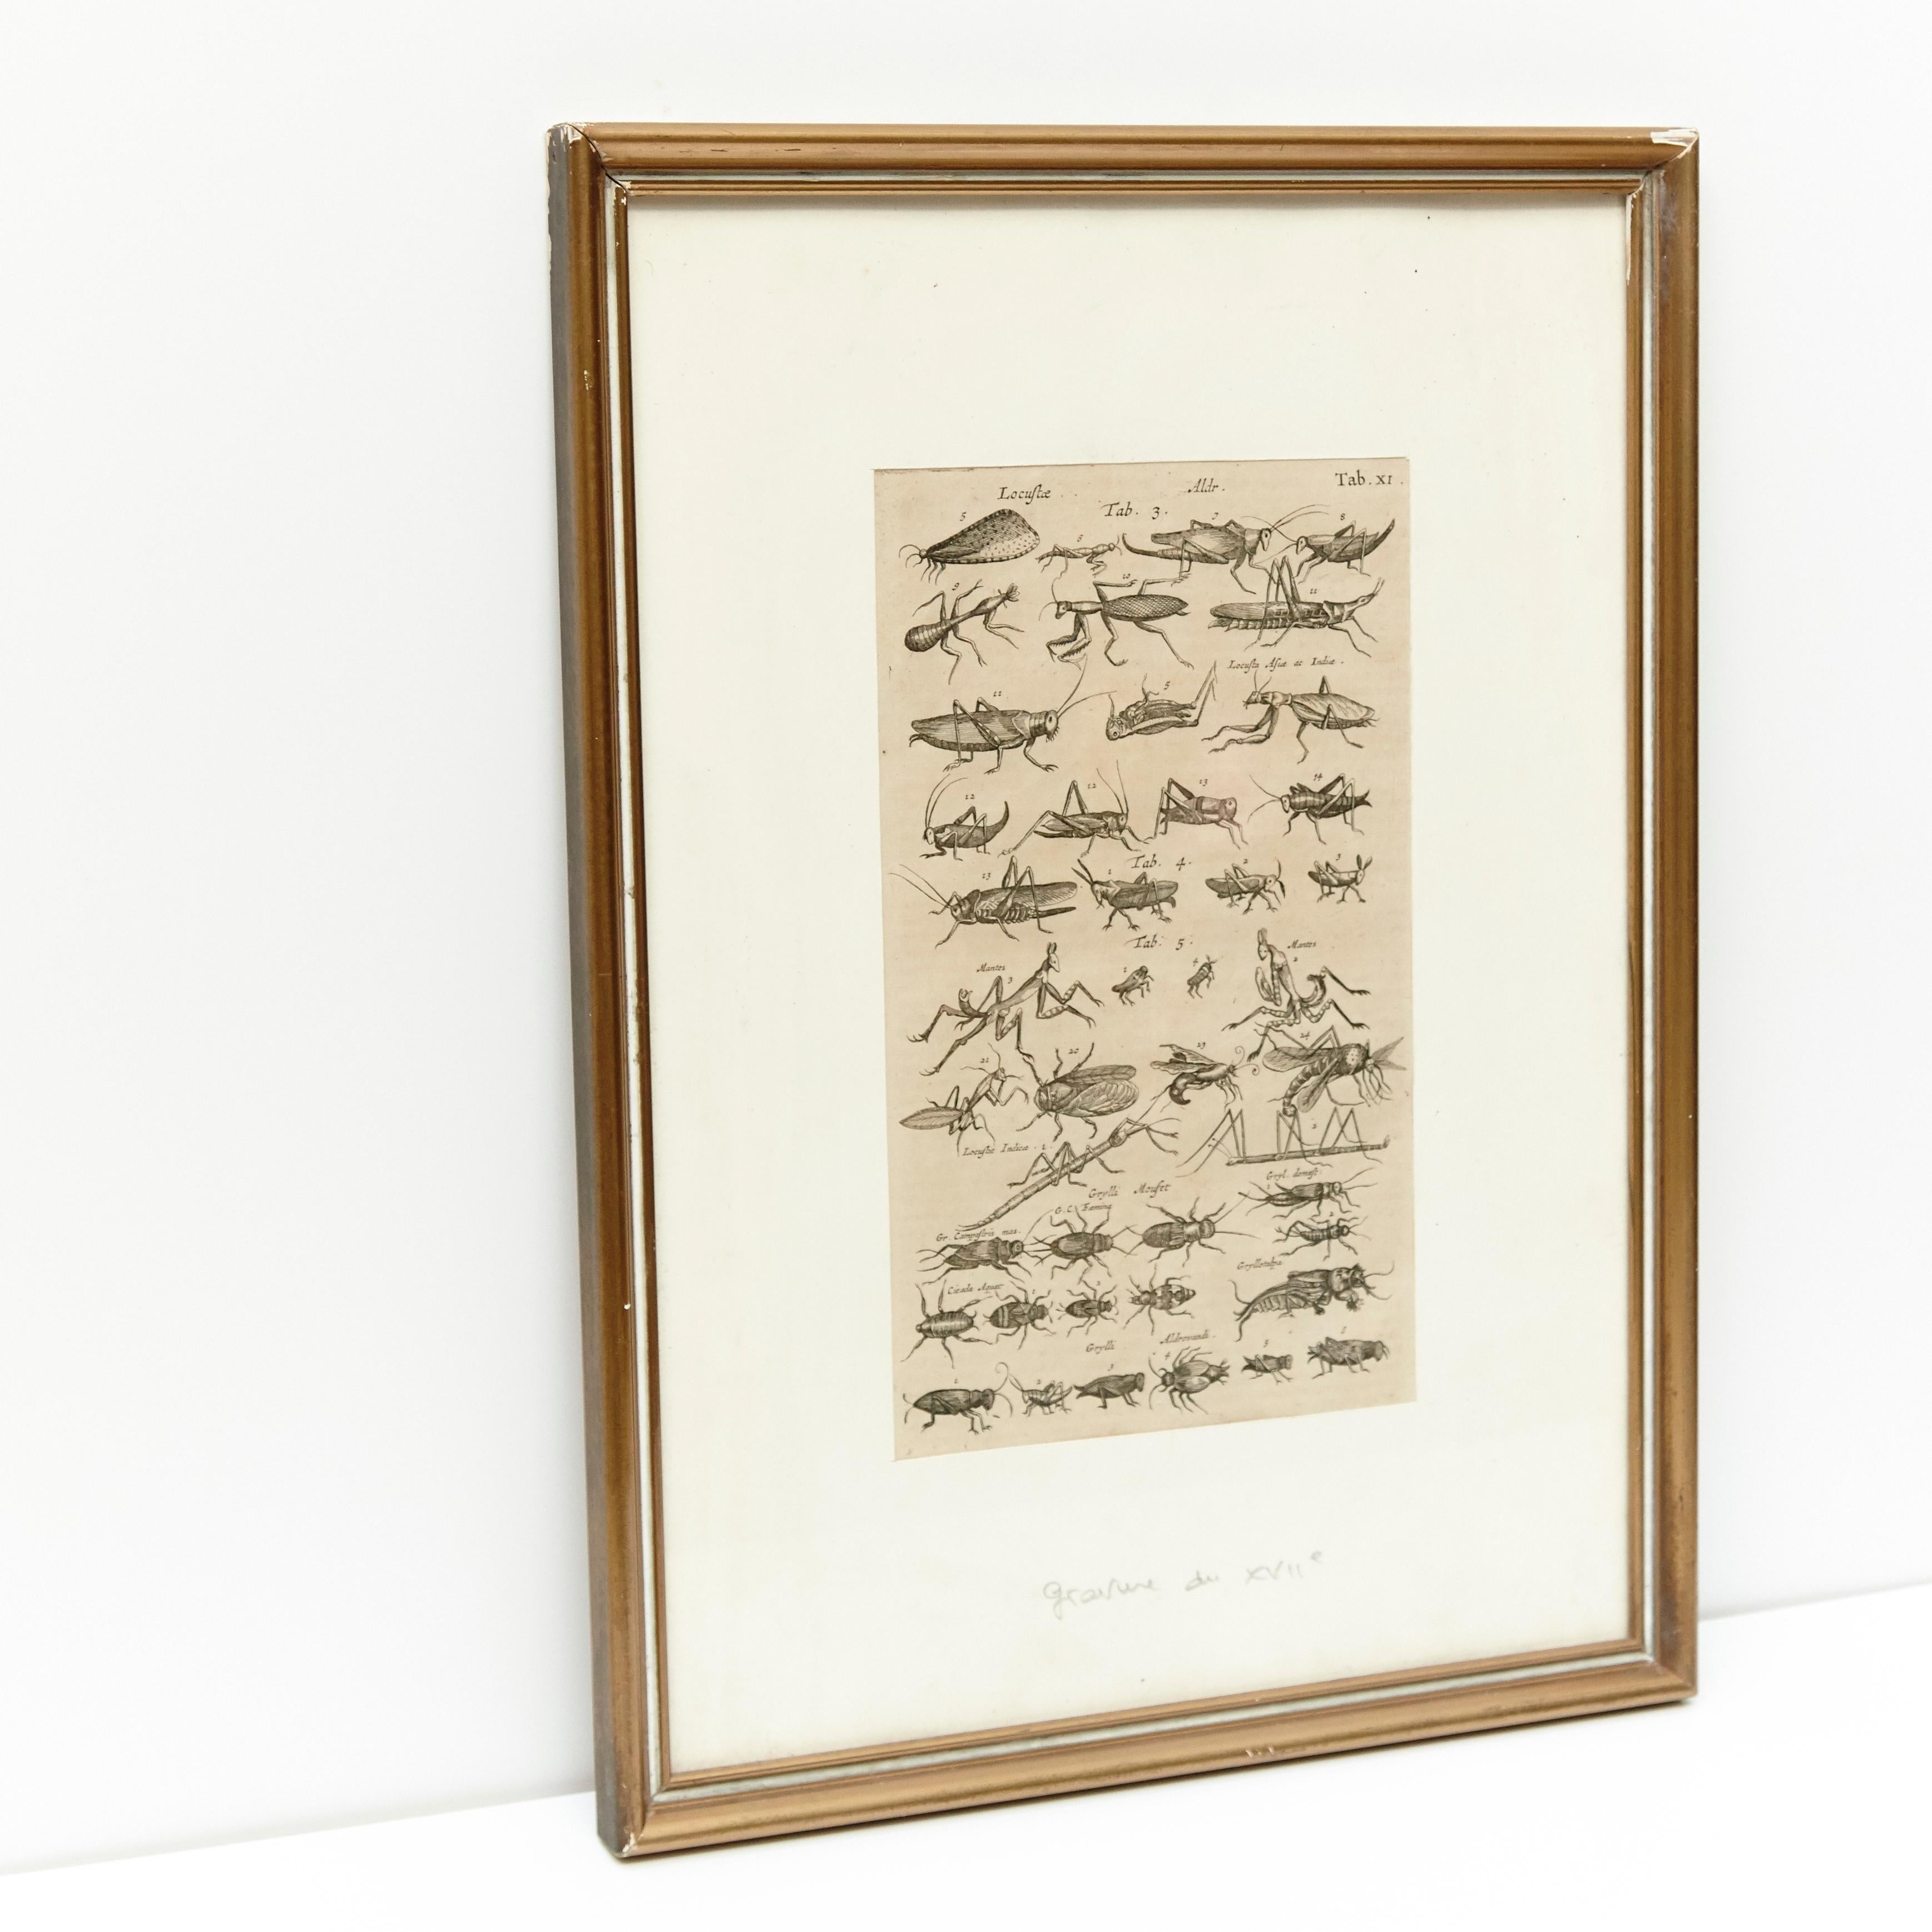 17th century French engraving of insects.

In original condition with minor wear consistent of age and use, preserving a beautiful patina.

 